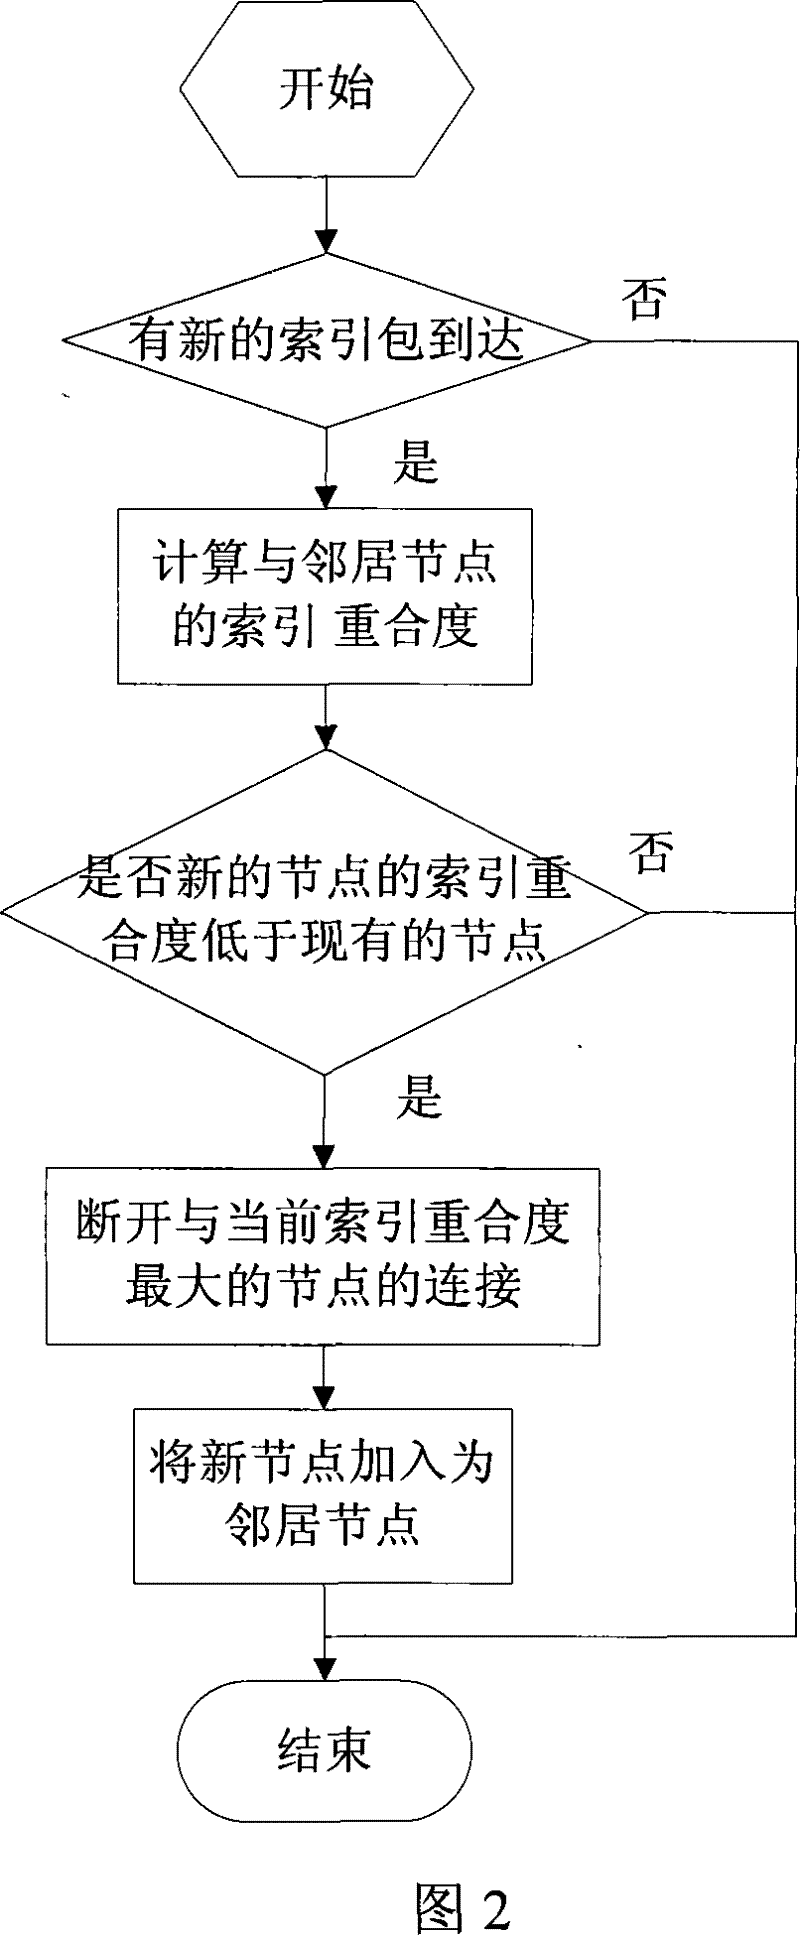 A Network Organization Method for Classified Retrieval in Peer-to-Peer Network Video Sharing System